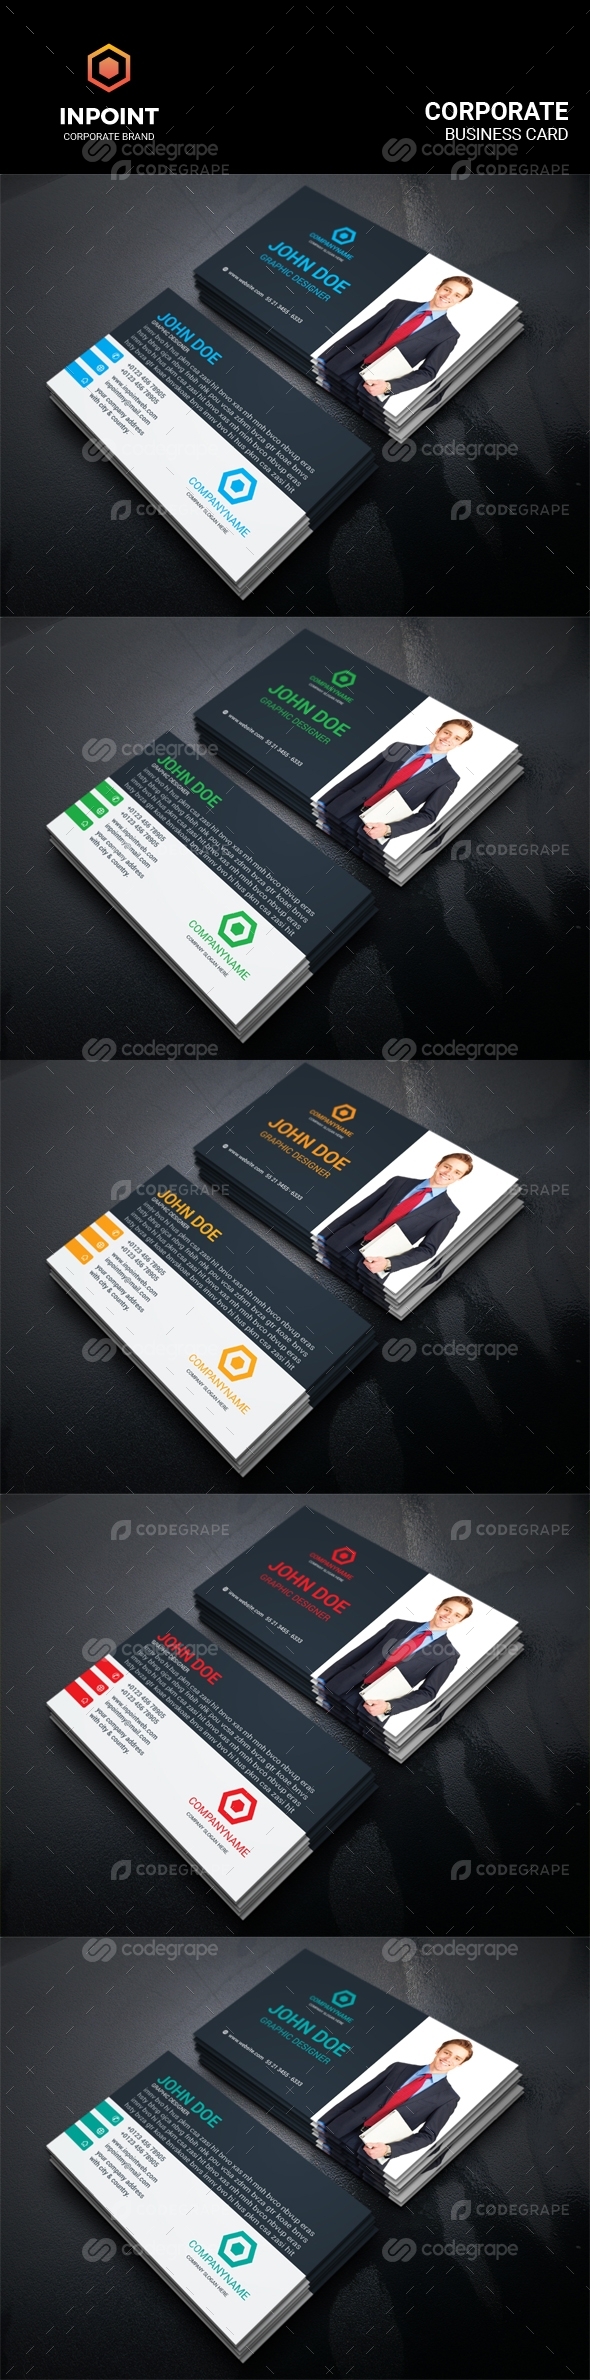 Inpoint Corporate Business Card